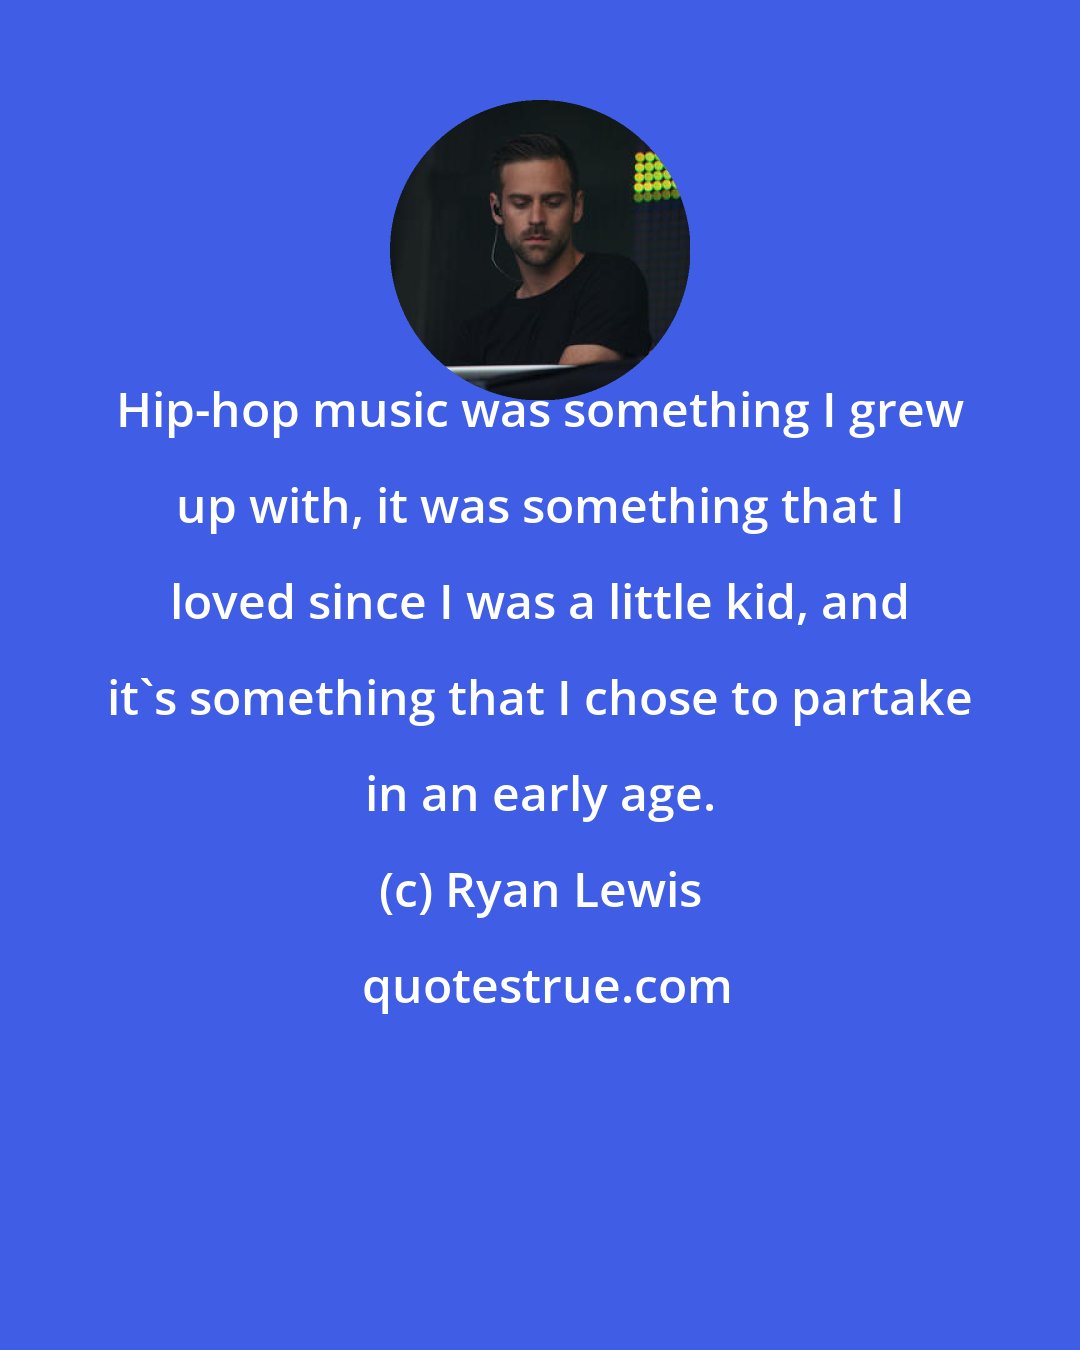 Ryan Lewis: Hip-hop music was something I grew up with, it was something that I loved since I was a little kid, and it's something that I chose to partake in an early age.